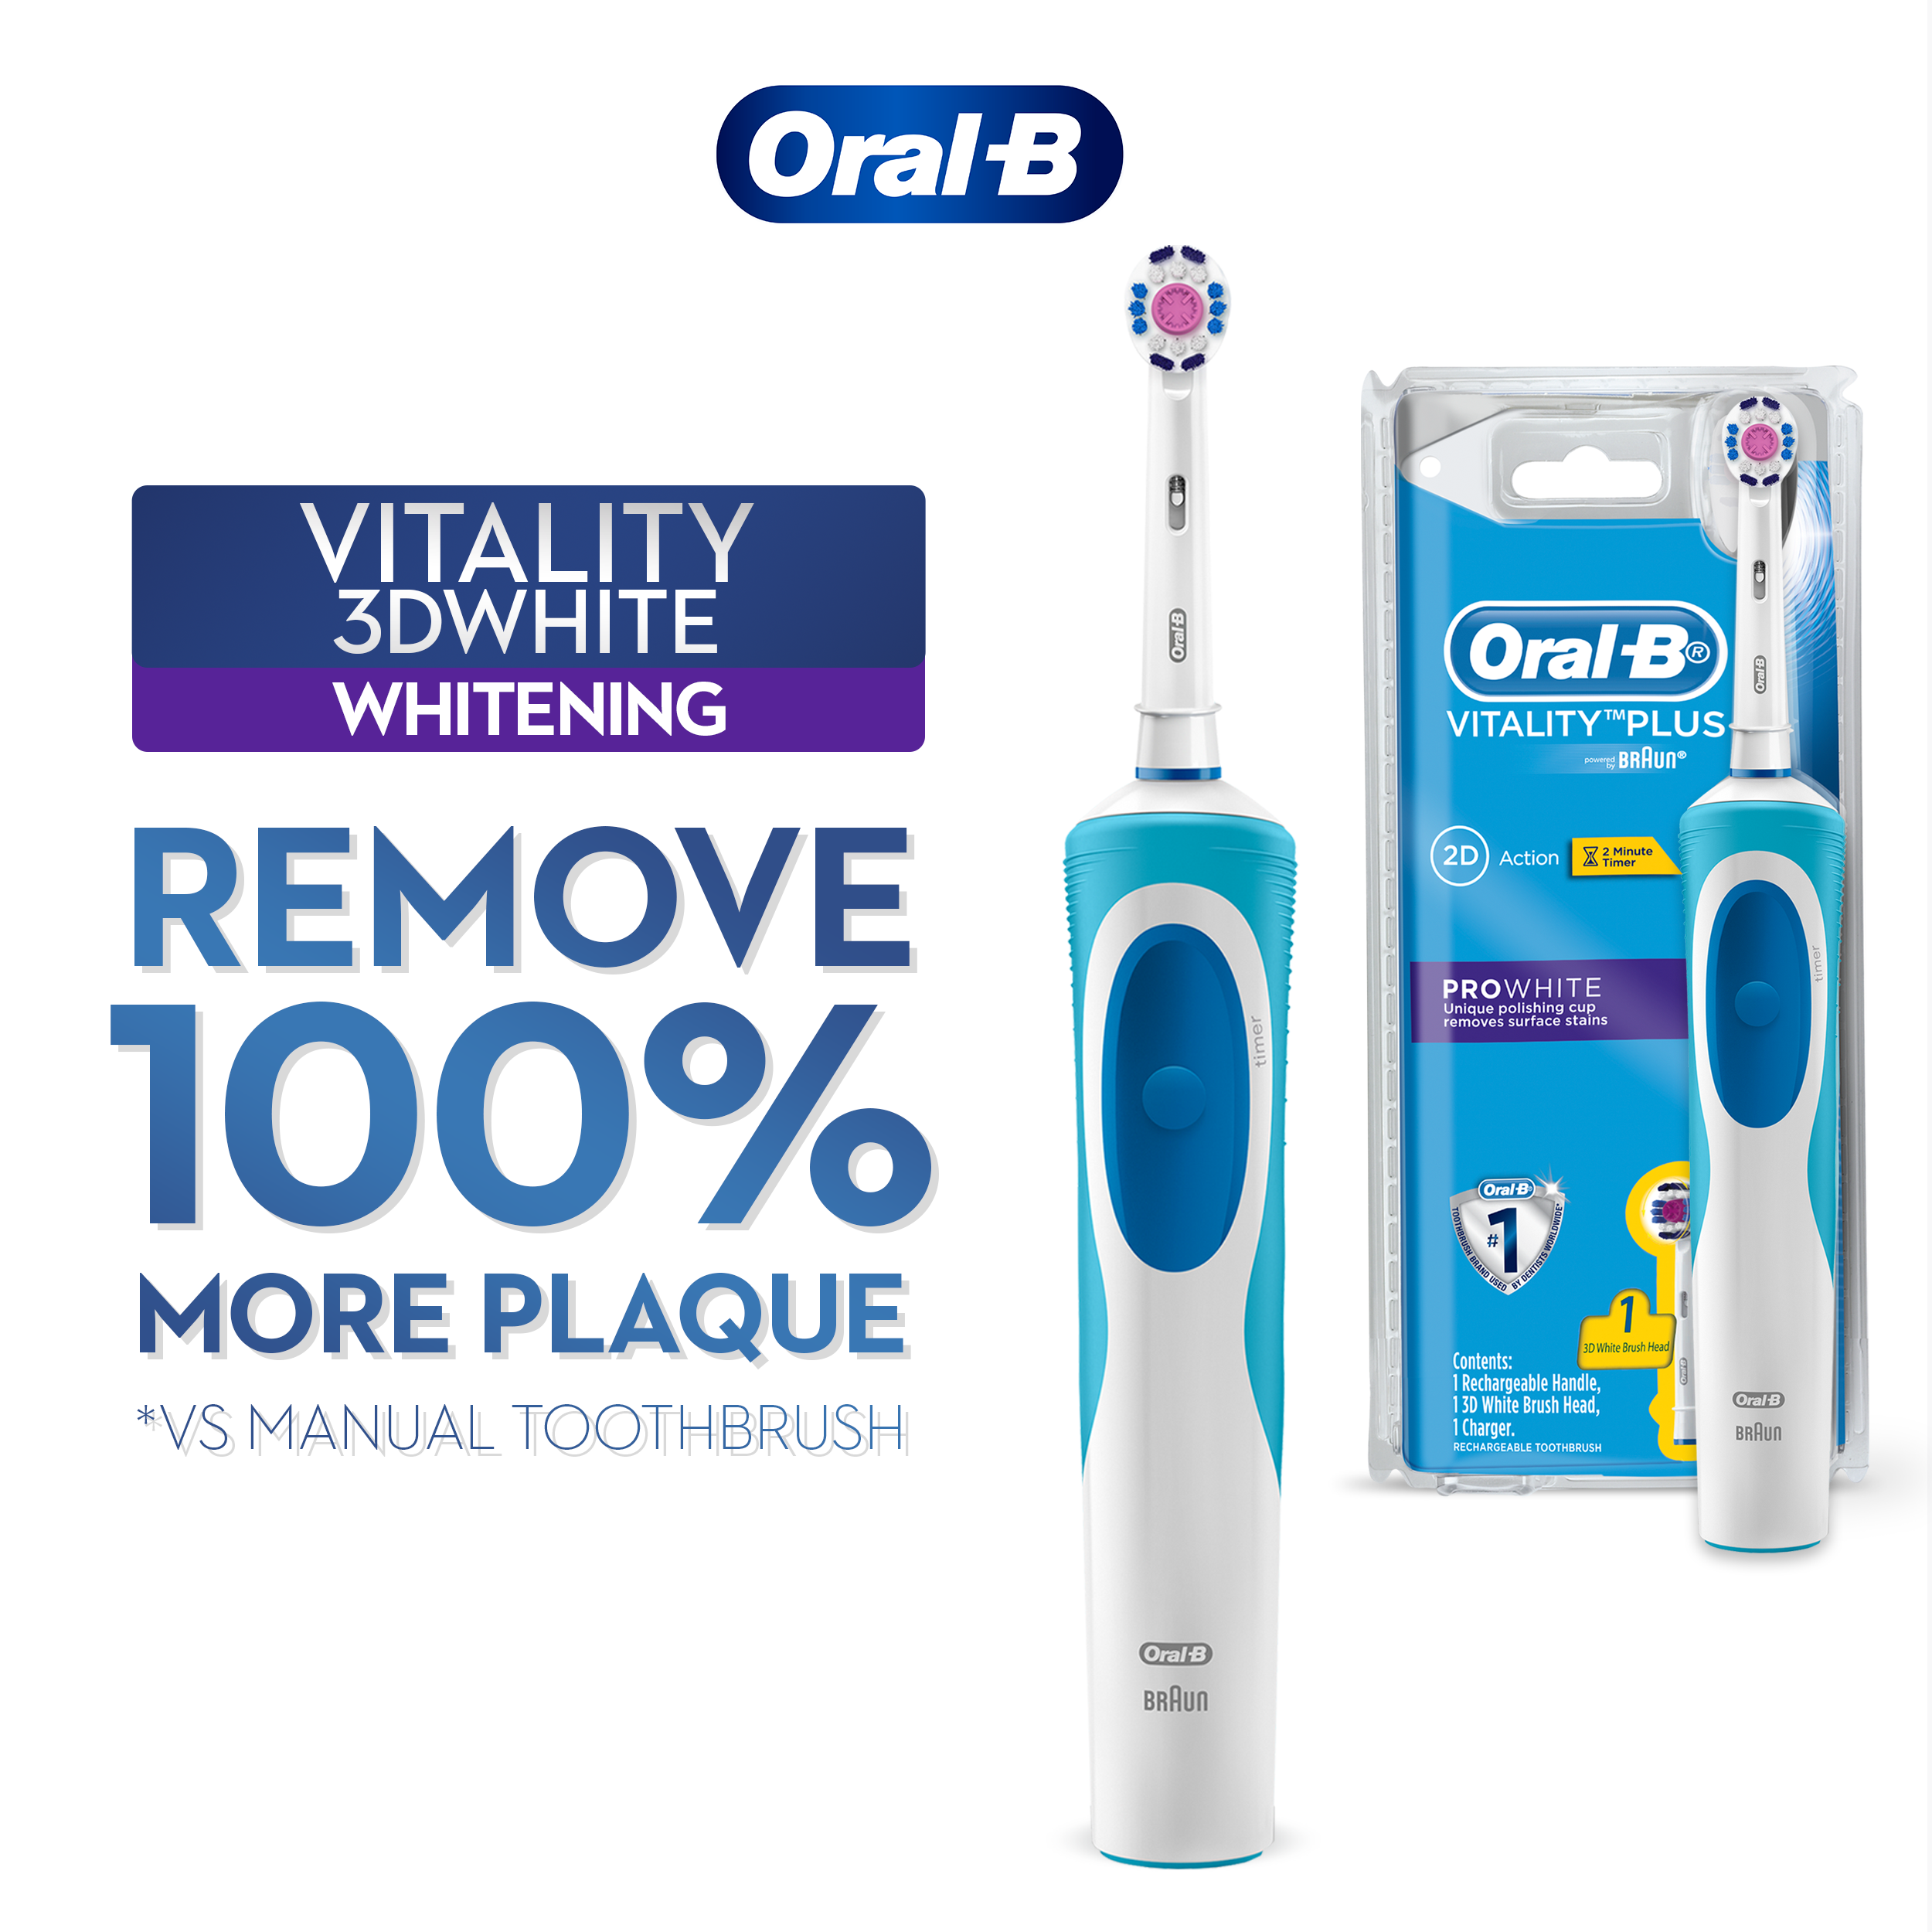 Oral-B Vitality Plus Prowhite Rechargeable Electric Toothbrush Powered By Braun